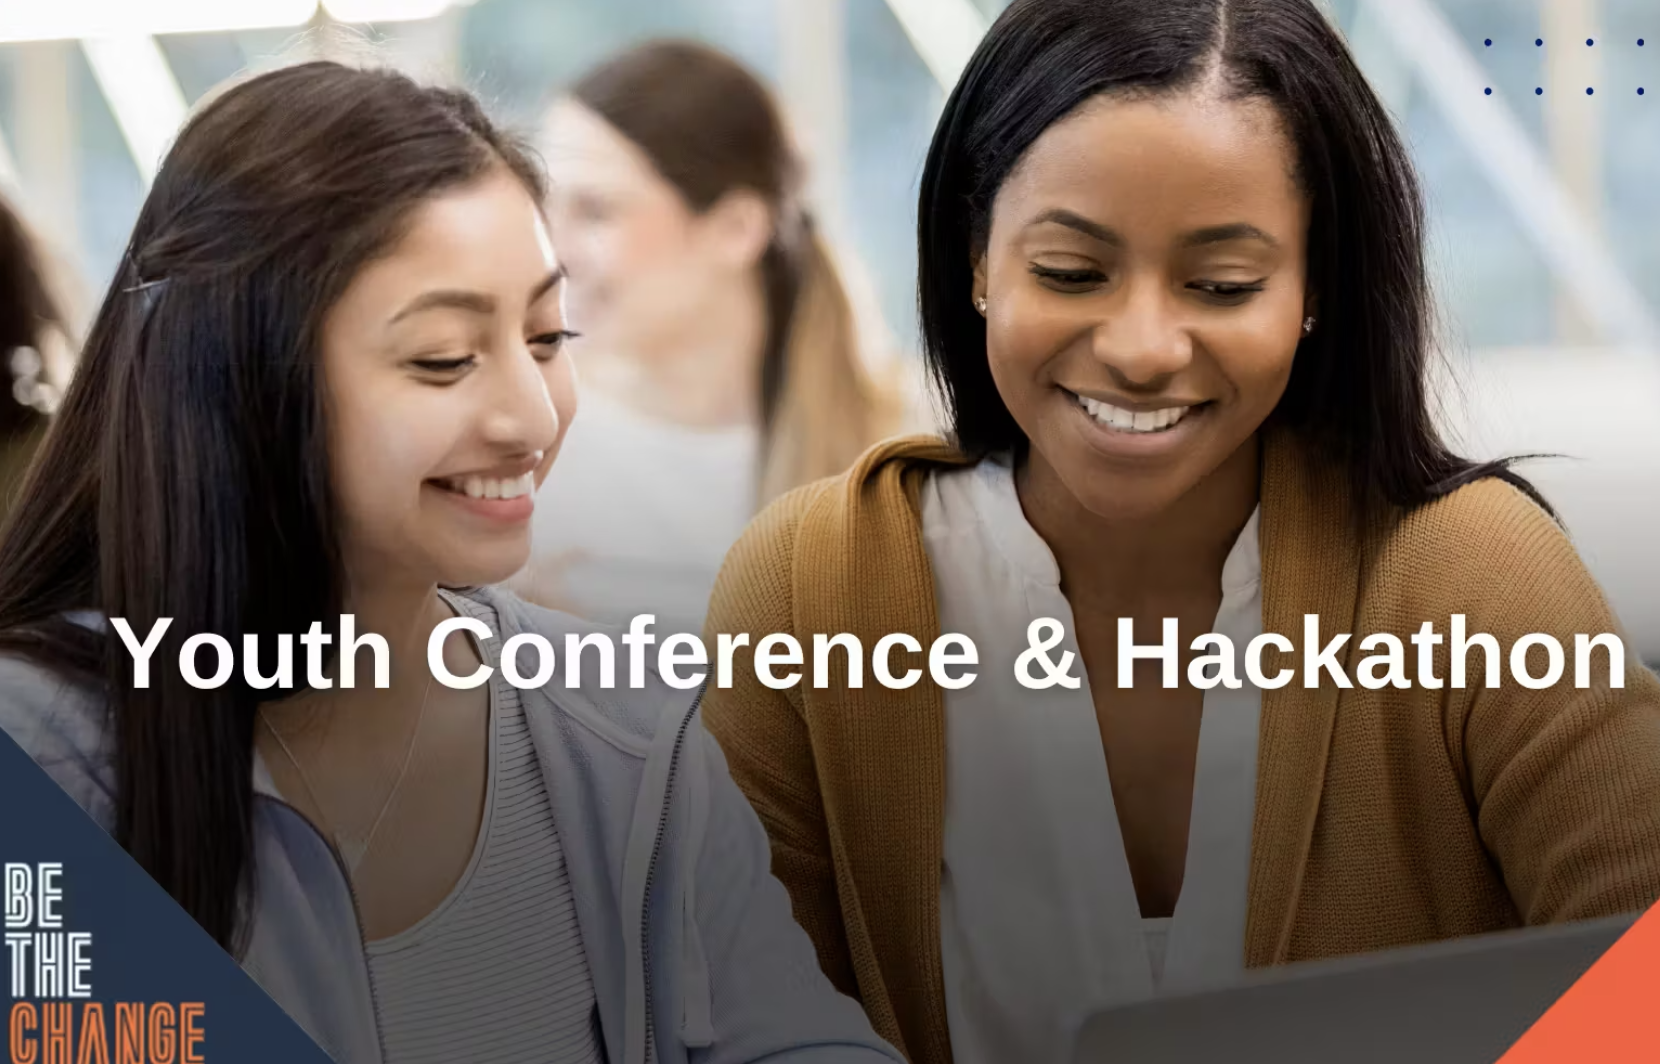 Youth Conference & Hackathon